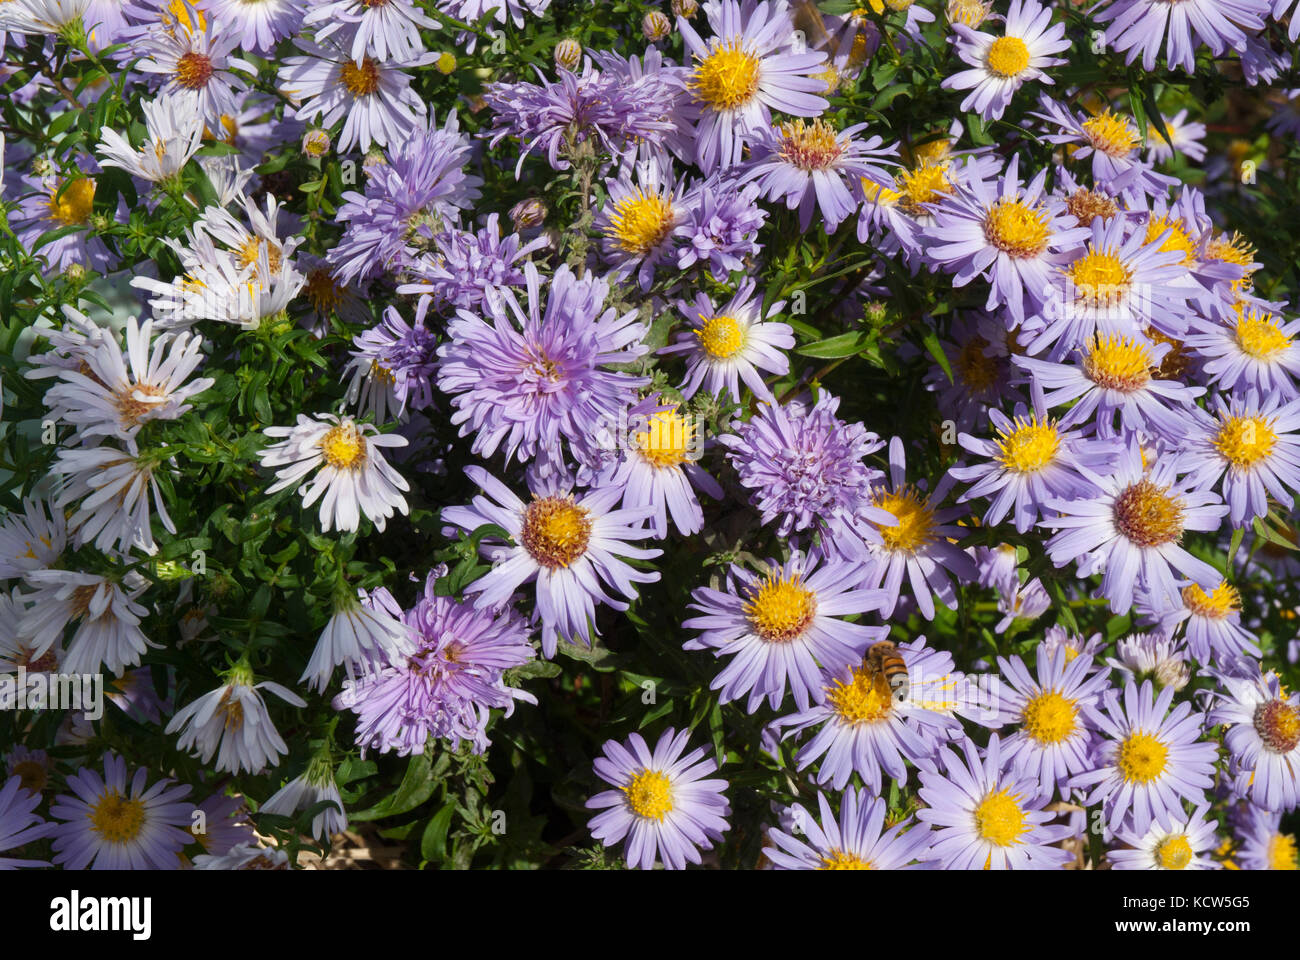 colourful mixed varieties of purple/mauve/pink asters growing. Honey bees pollinating Stock Photo